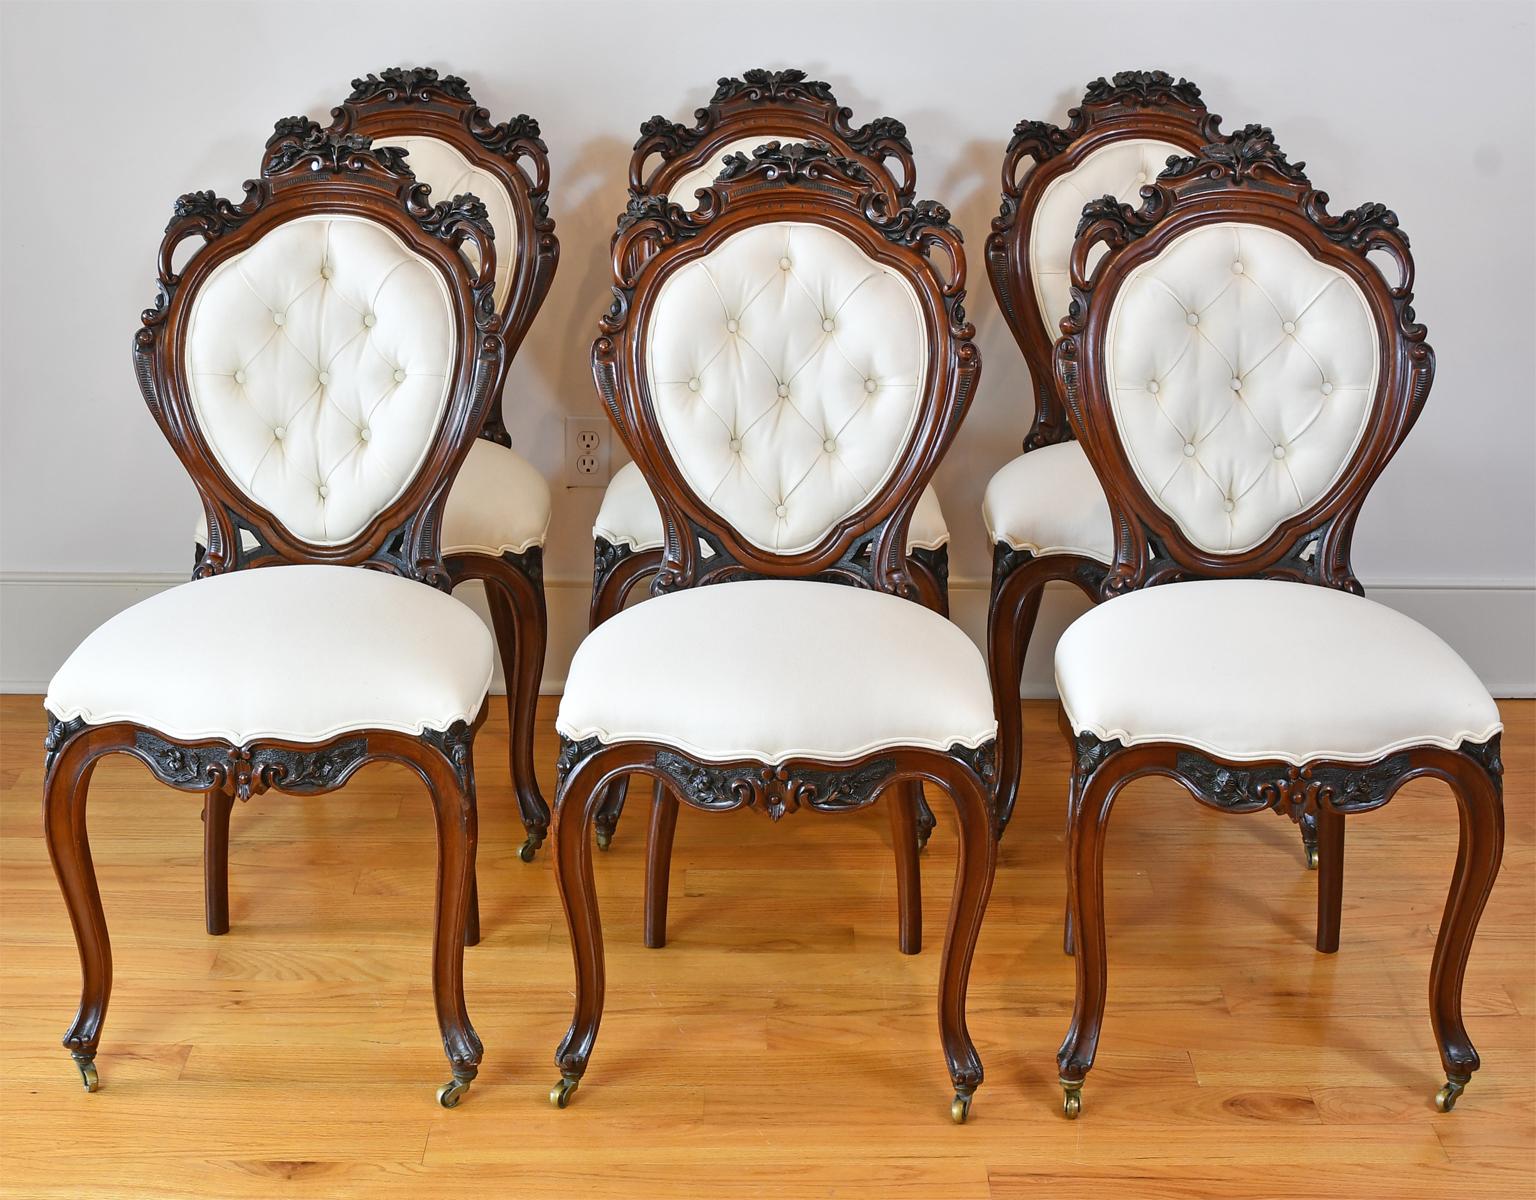 A set of 6 finely-carved Napoleon III dining chairs in a dark chocolate-colored mahogany with upholstered seat and tufted balloon-back. Carved embellishments on chair frame include pierced scrollwork with foliate and floral carvings. The upholstered